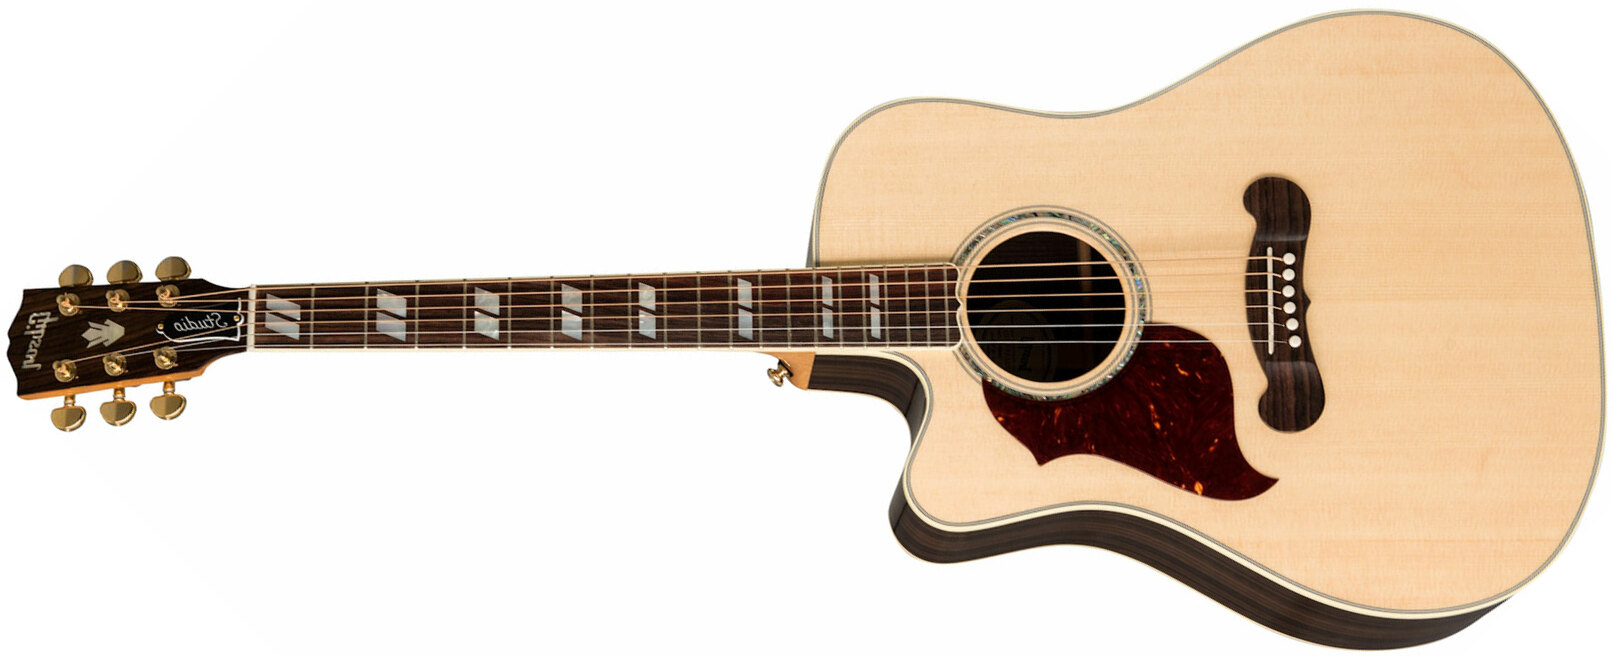 Gibson Songwriter Cutaway Lh Gaucher 2019 Dreadnought Epicea Palissandre Rw - Natural - Guitare Acoustique - Main picture